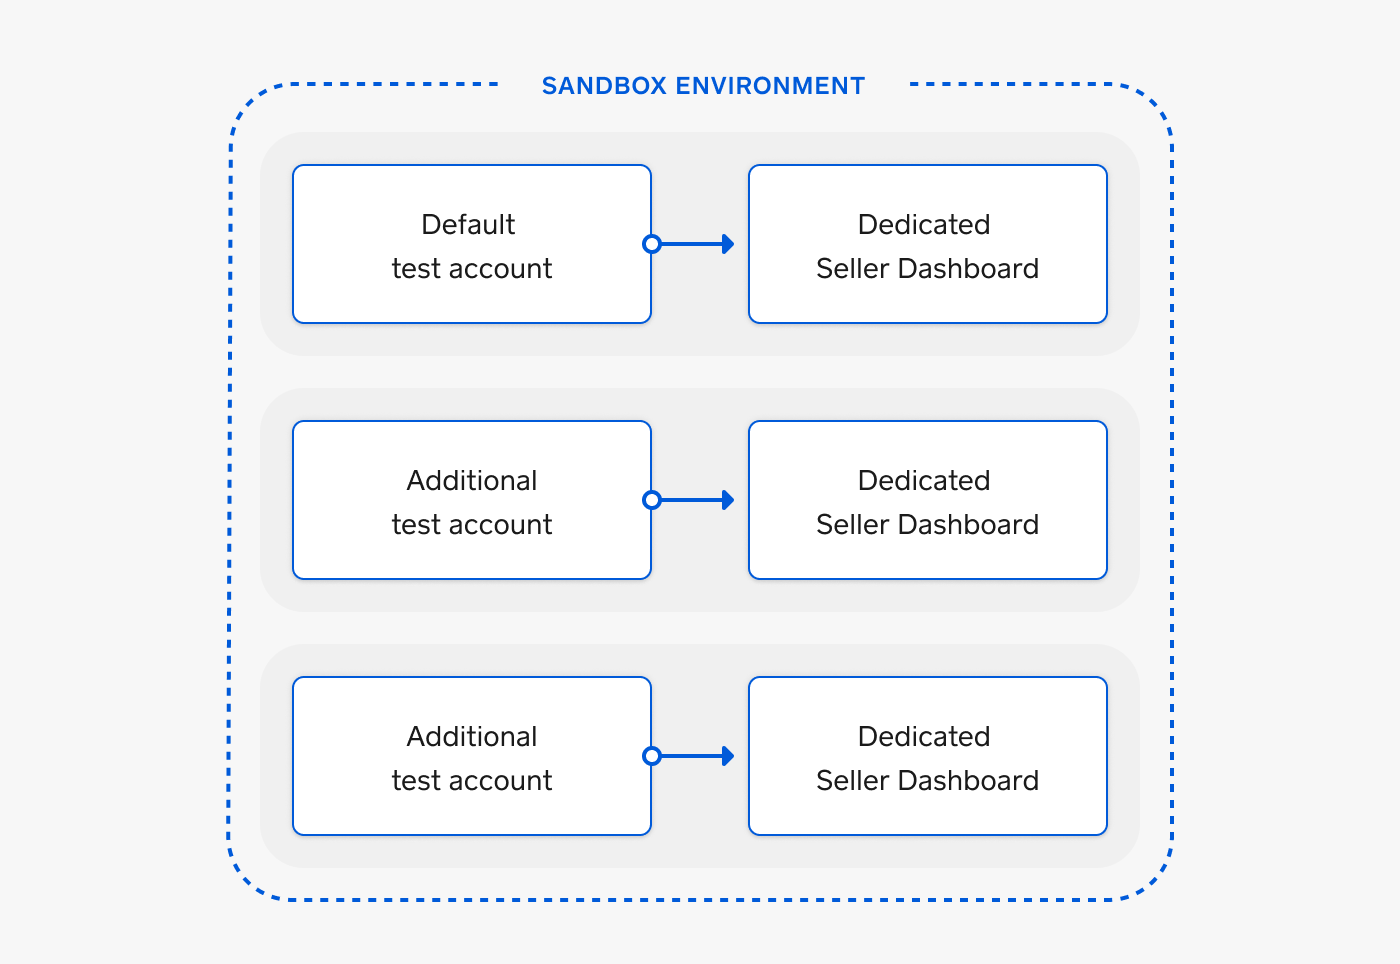 A diagram that shows Sandbox test account relationships.